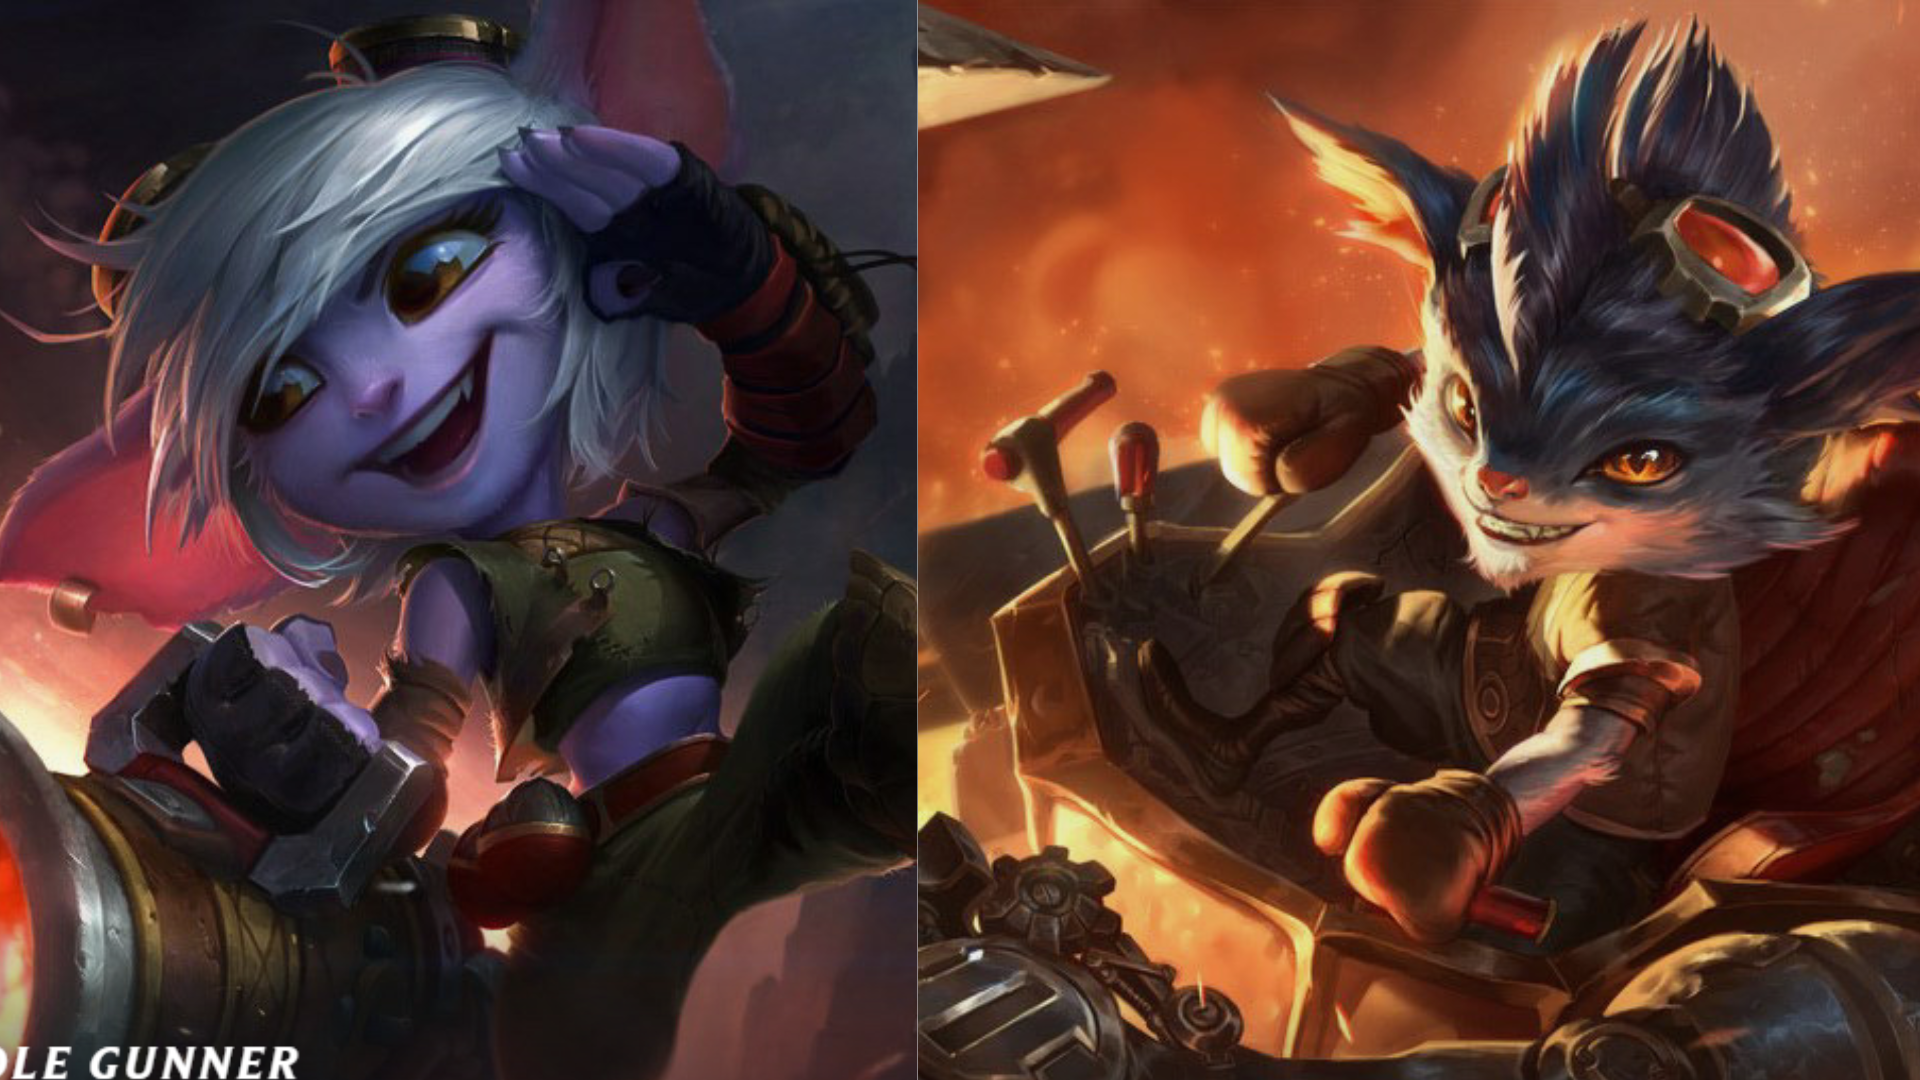 Tristana and Rumble